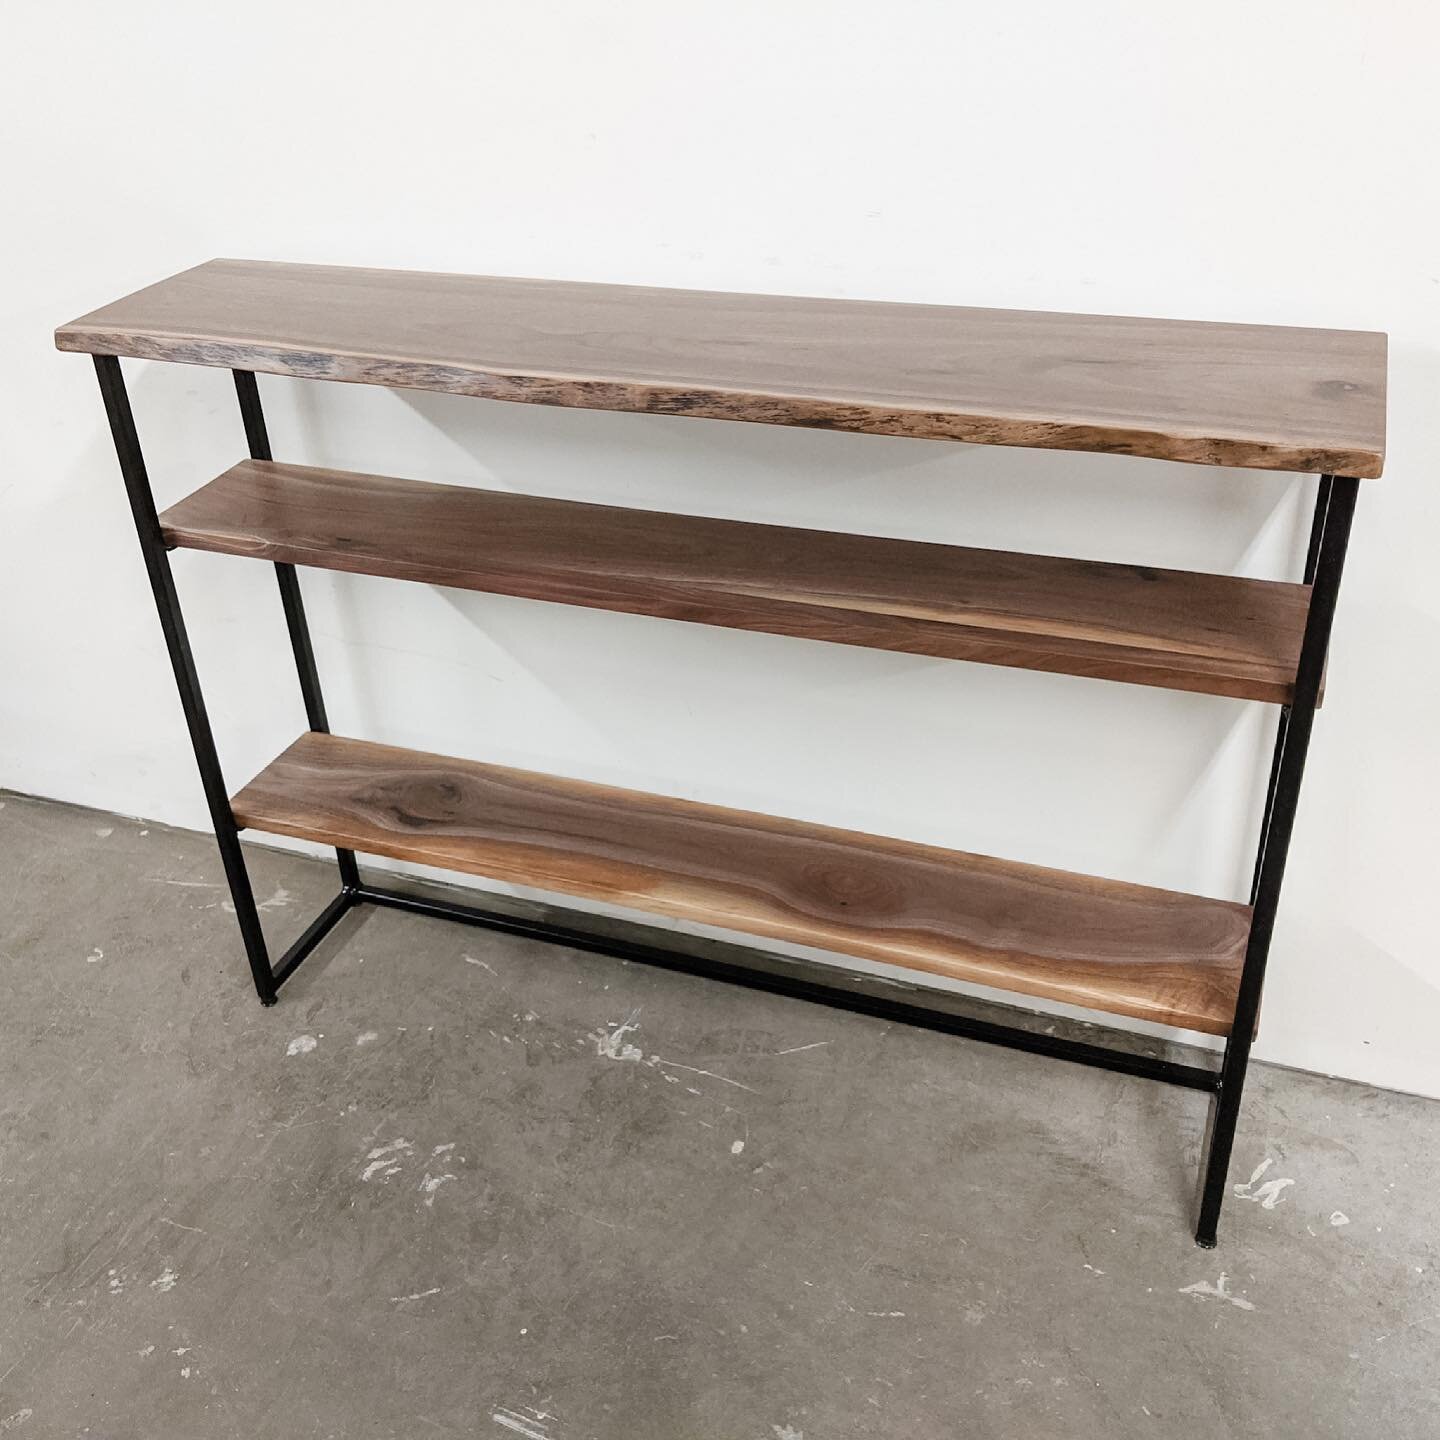 A sleek walnut console is perfect for so many spaces. With this piece, we added two shelves below for increased storage and styling opportunities.

#customfurniture #liveedge #customwoodwork #interiordesign #interiordecorating #livingroomdecor #livin